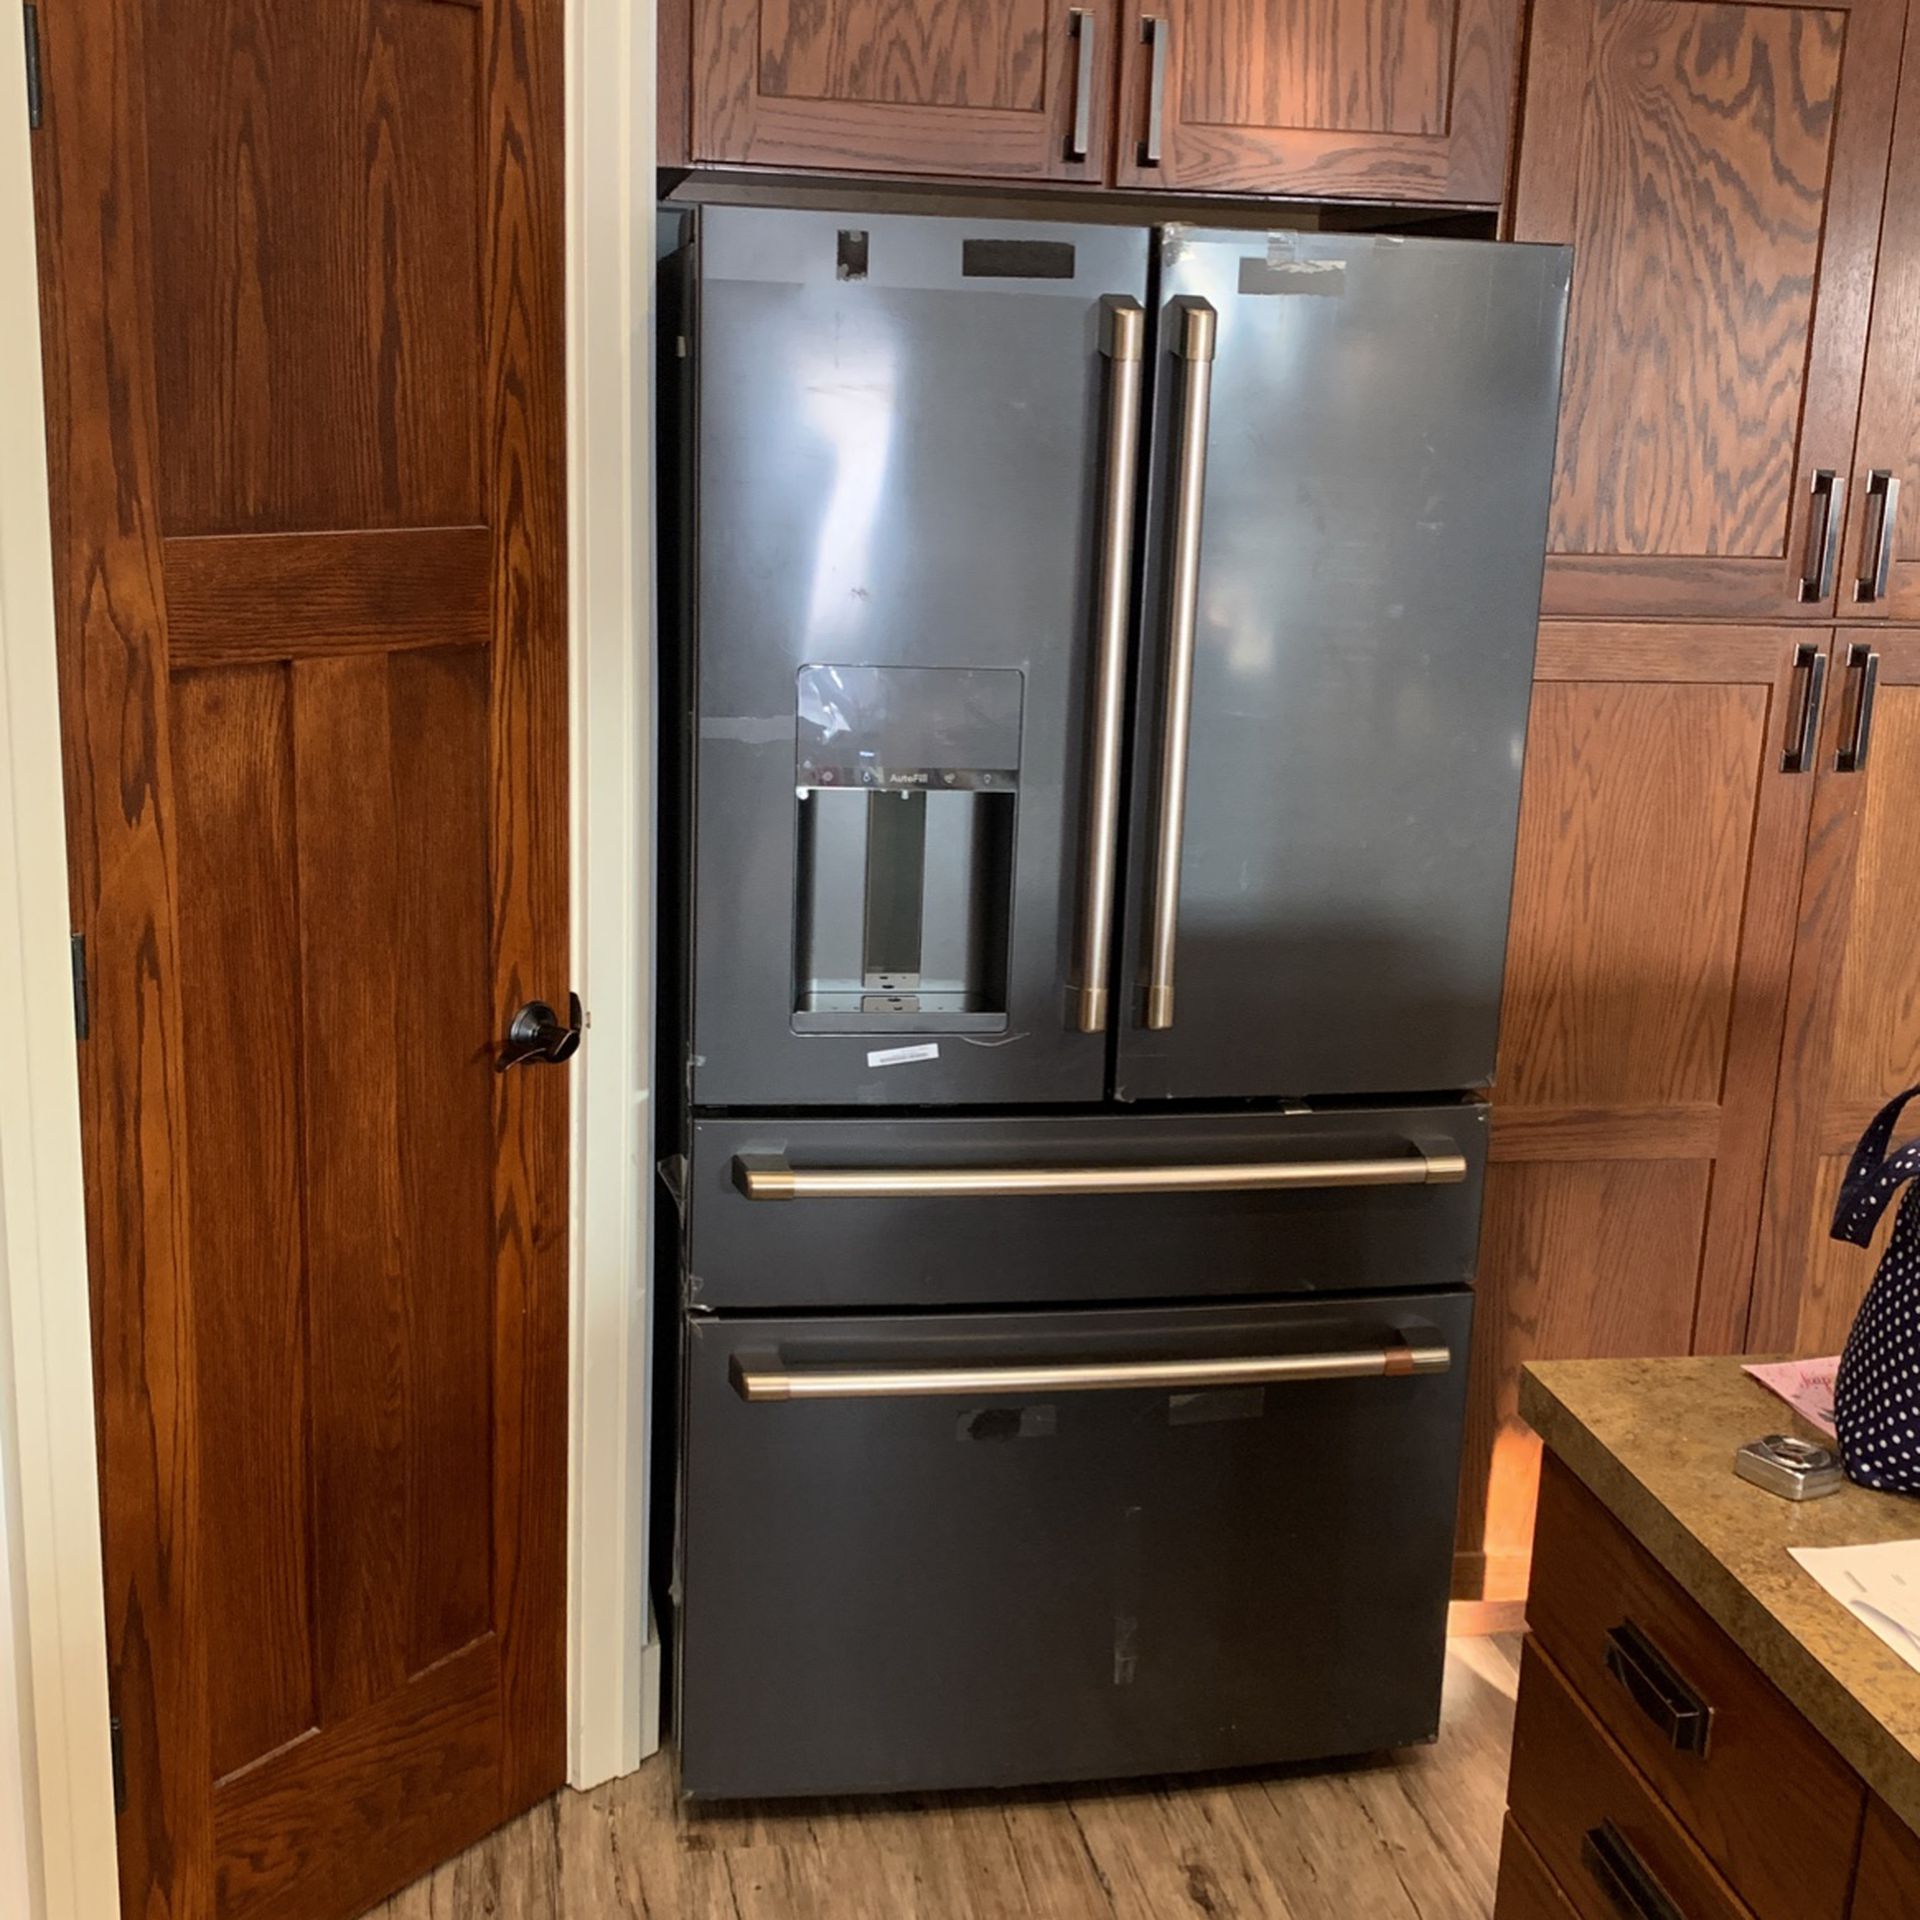 GE Cafe Refrigerator Unused And Wrong Size For Kitchen 